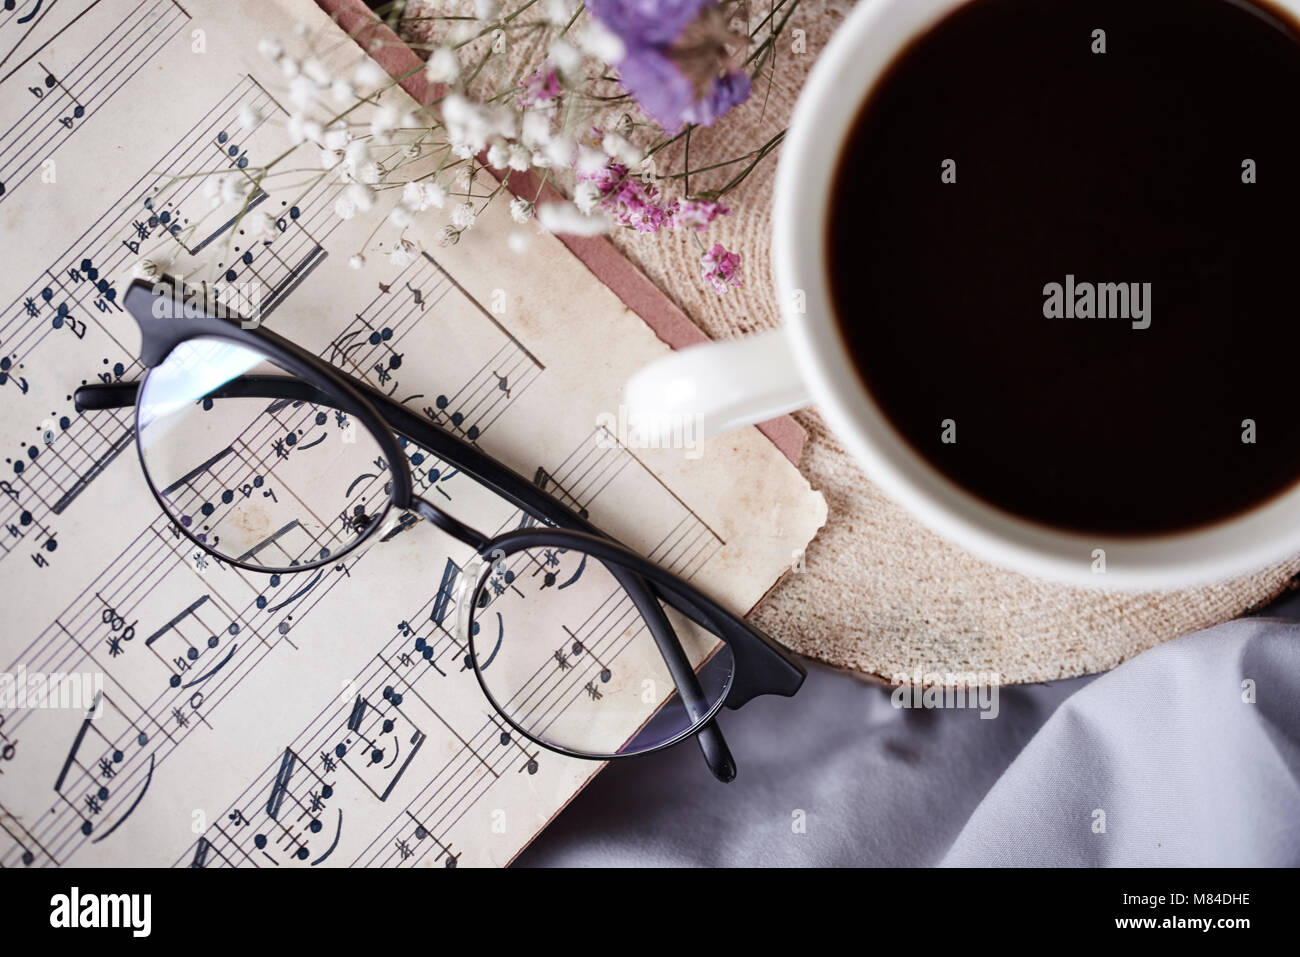 Black Coffee And Music Note At Bedroom Stock Photo